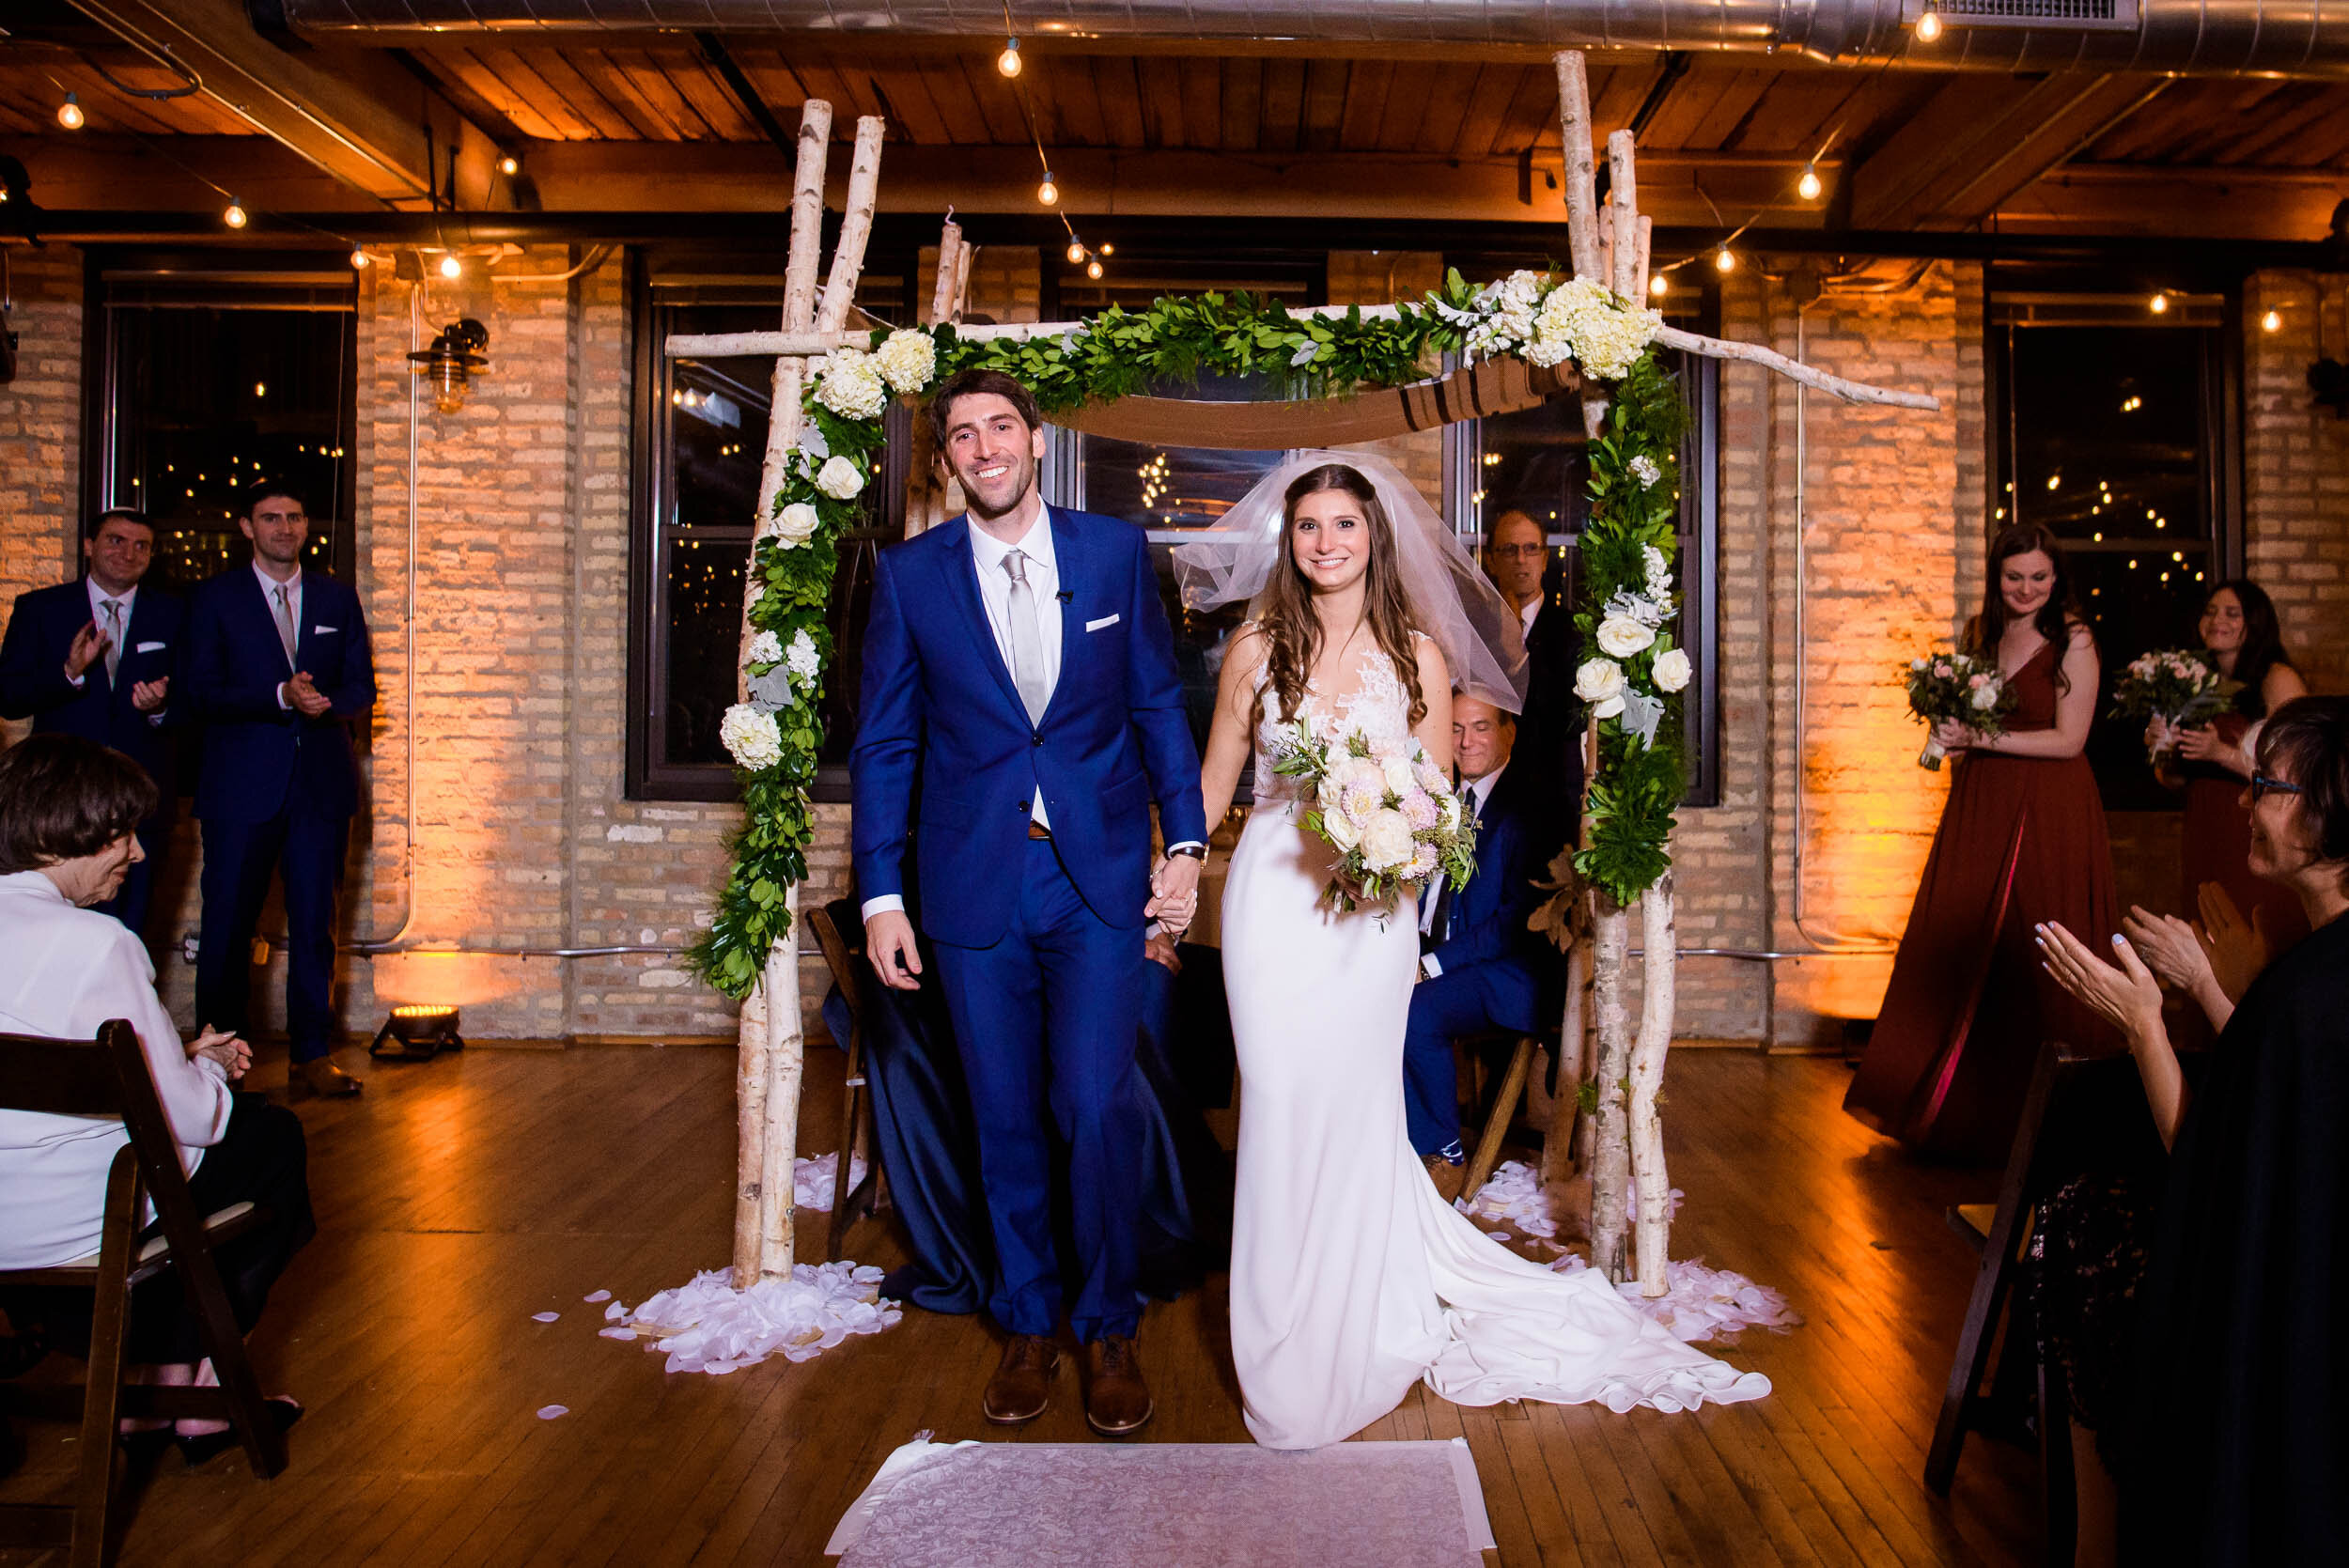 Bride and groom walk down the aisle married during their ceremony: Ravenswood Event Center Chicago wedding captured by J. Brown Photography.  